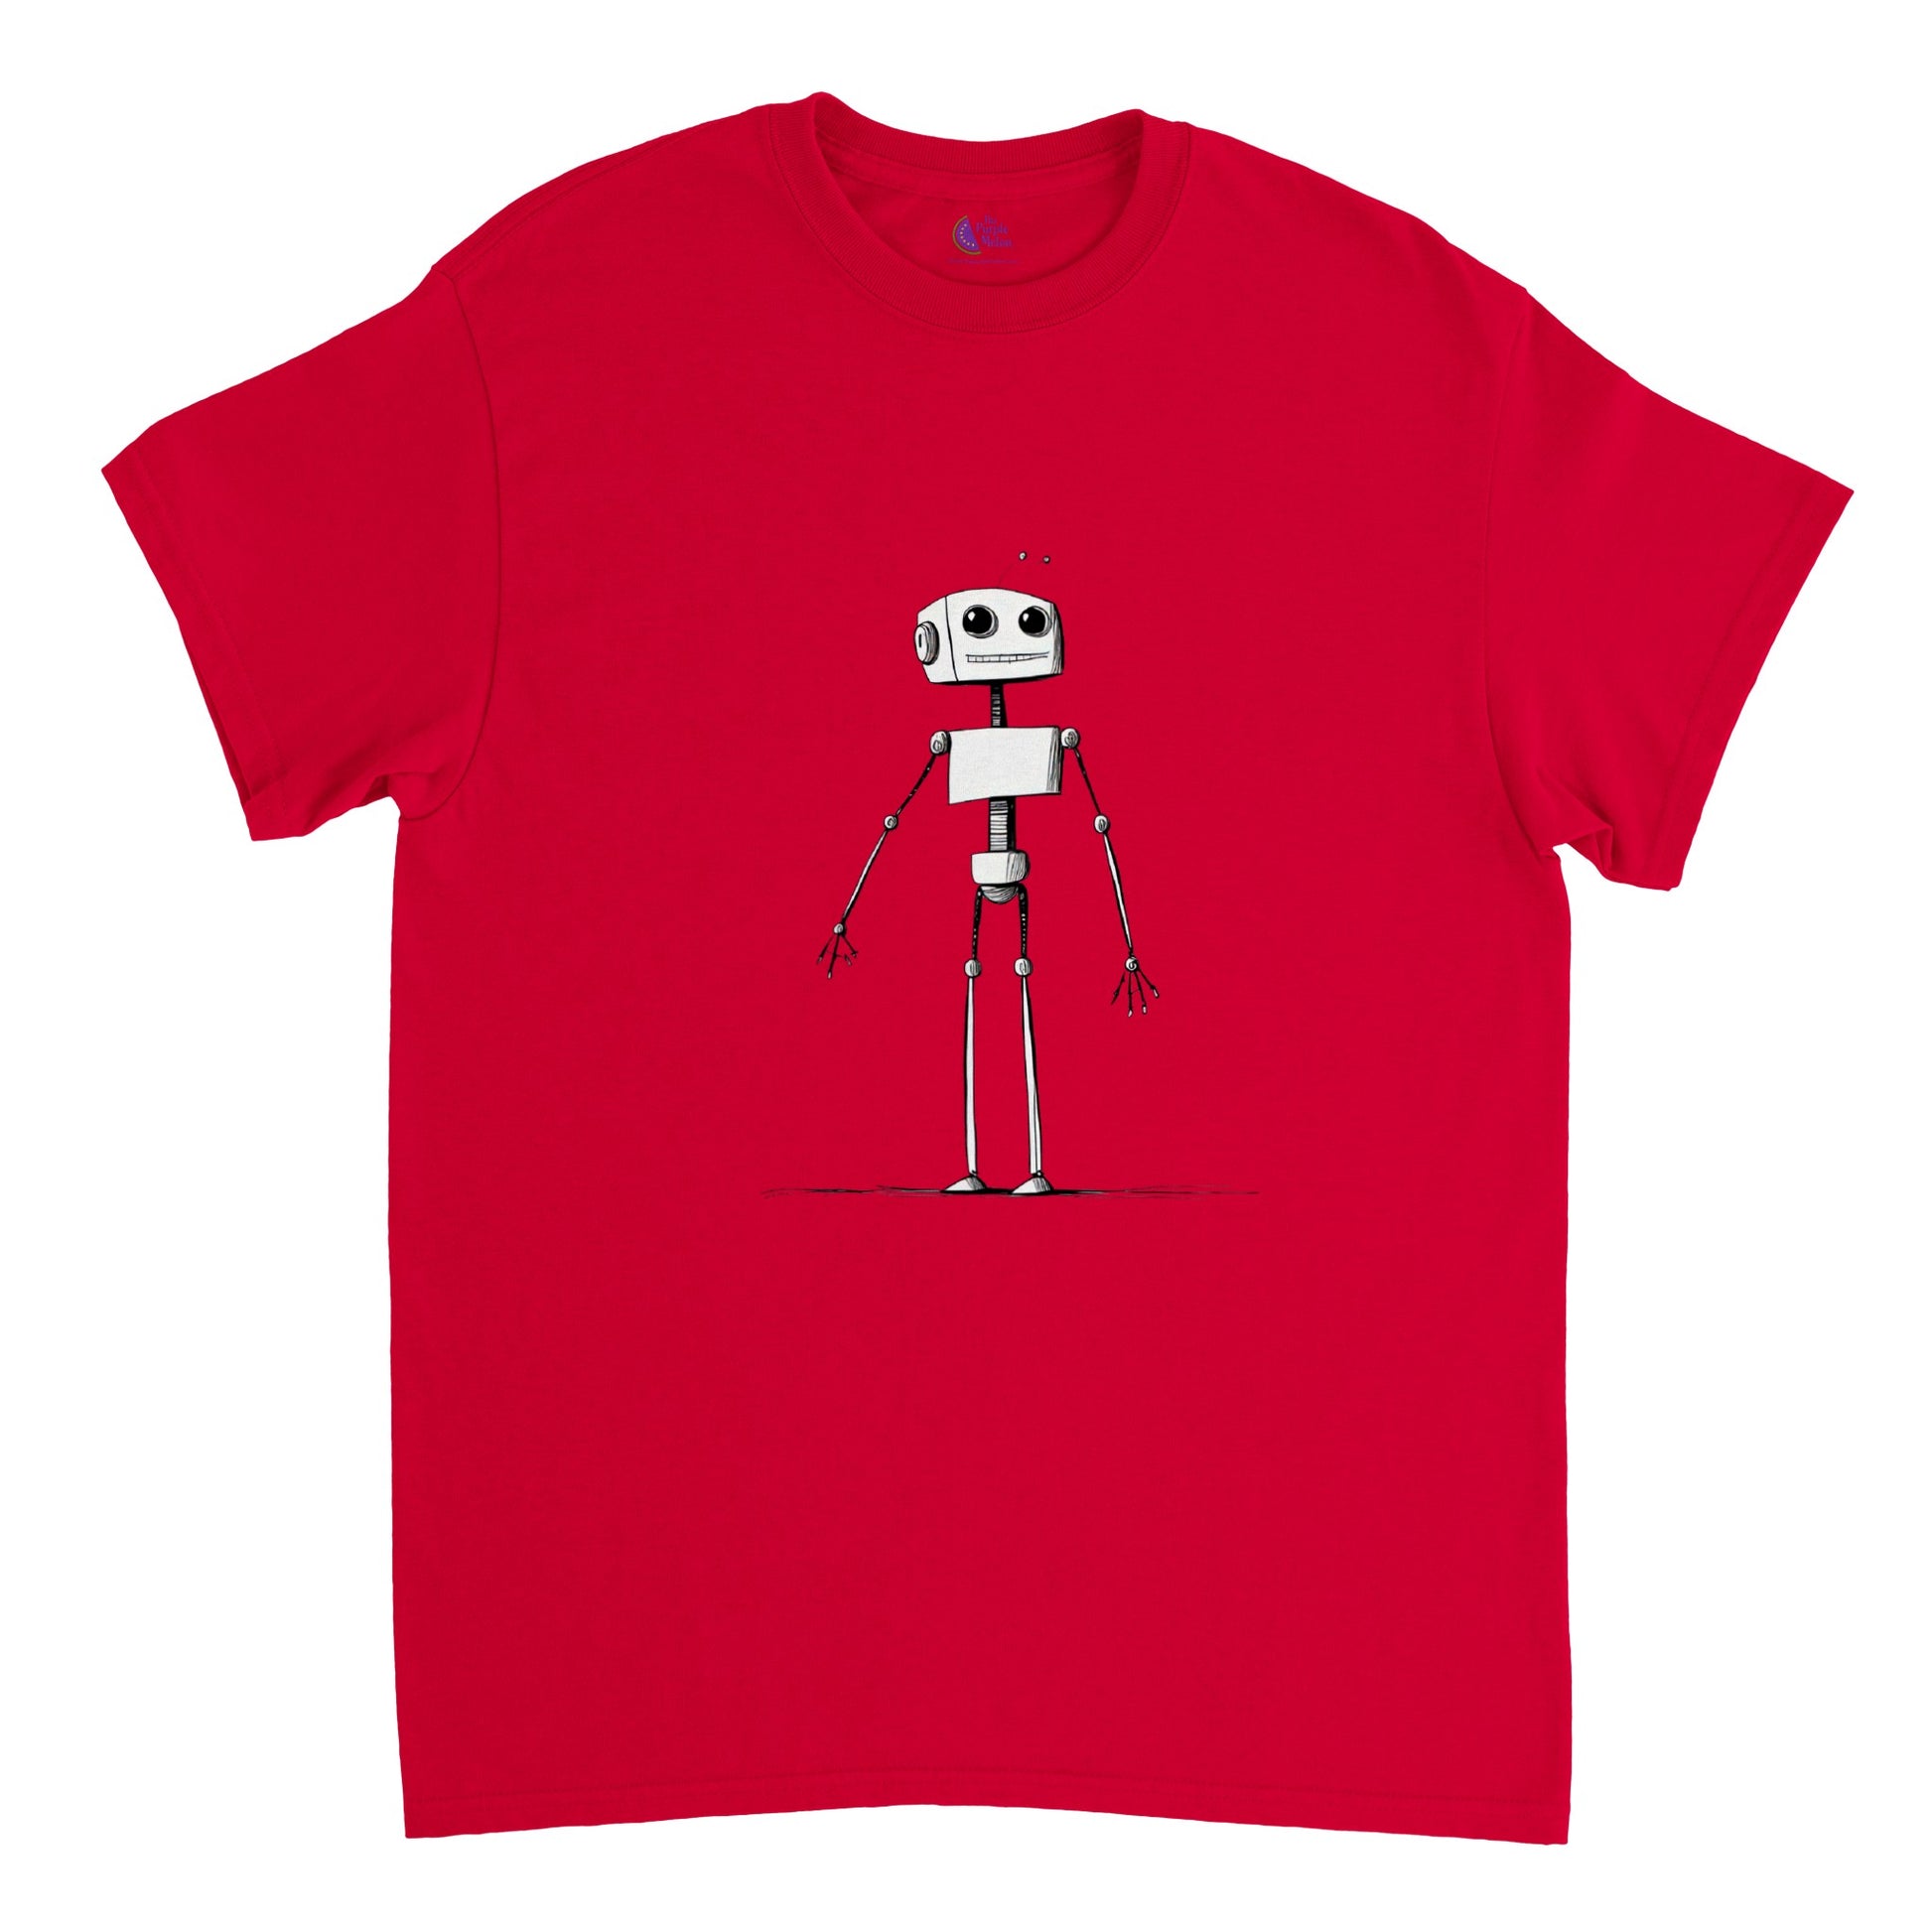 Red t-shirt with smiling robot illustration